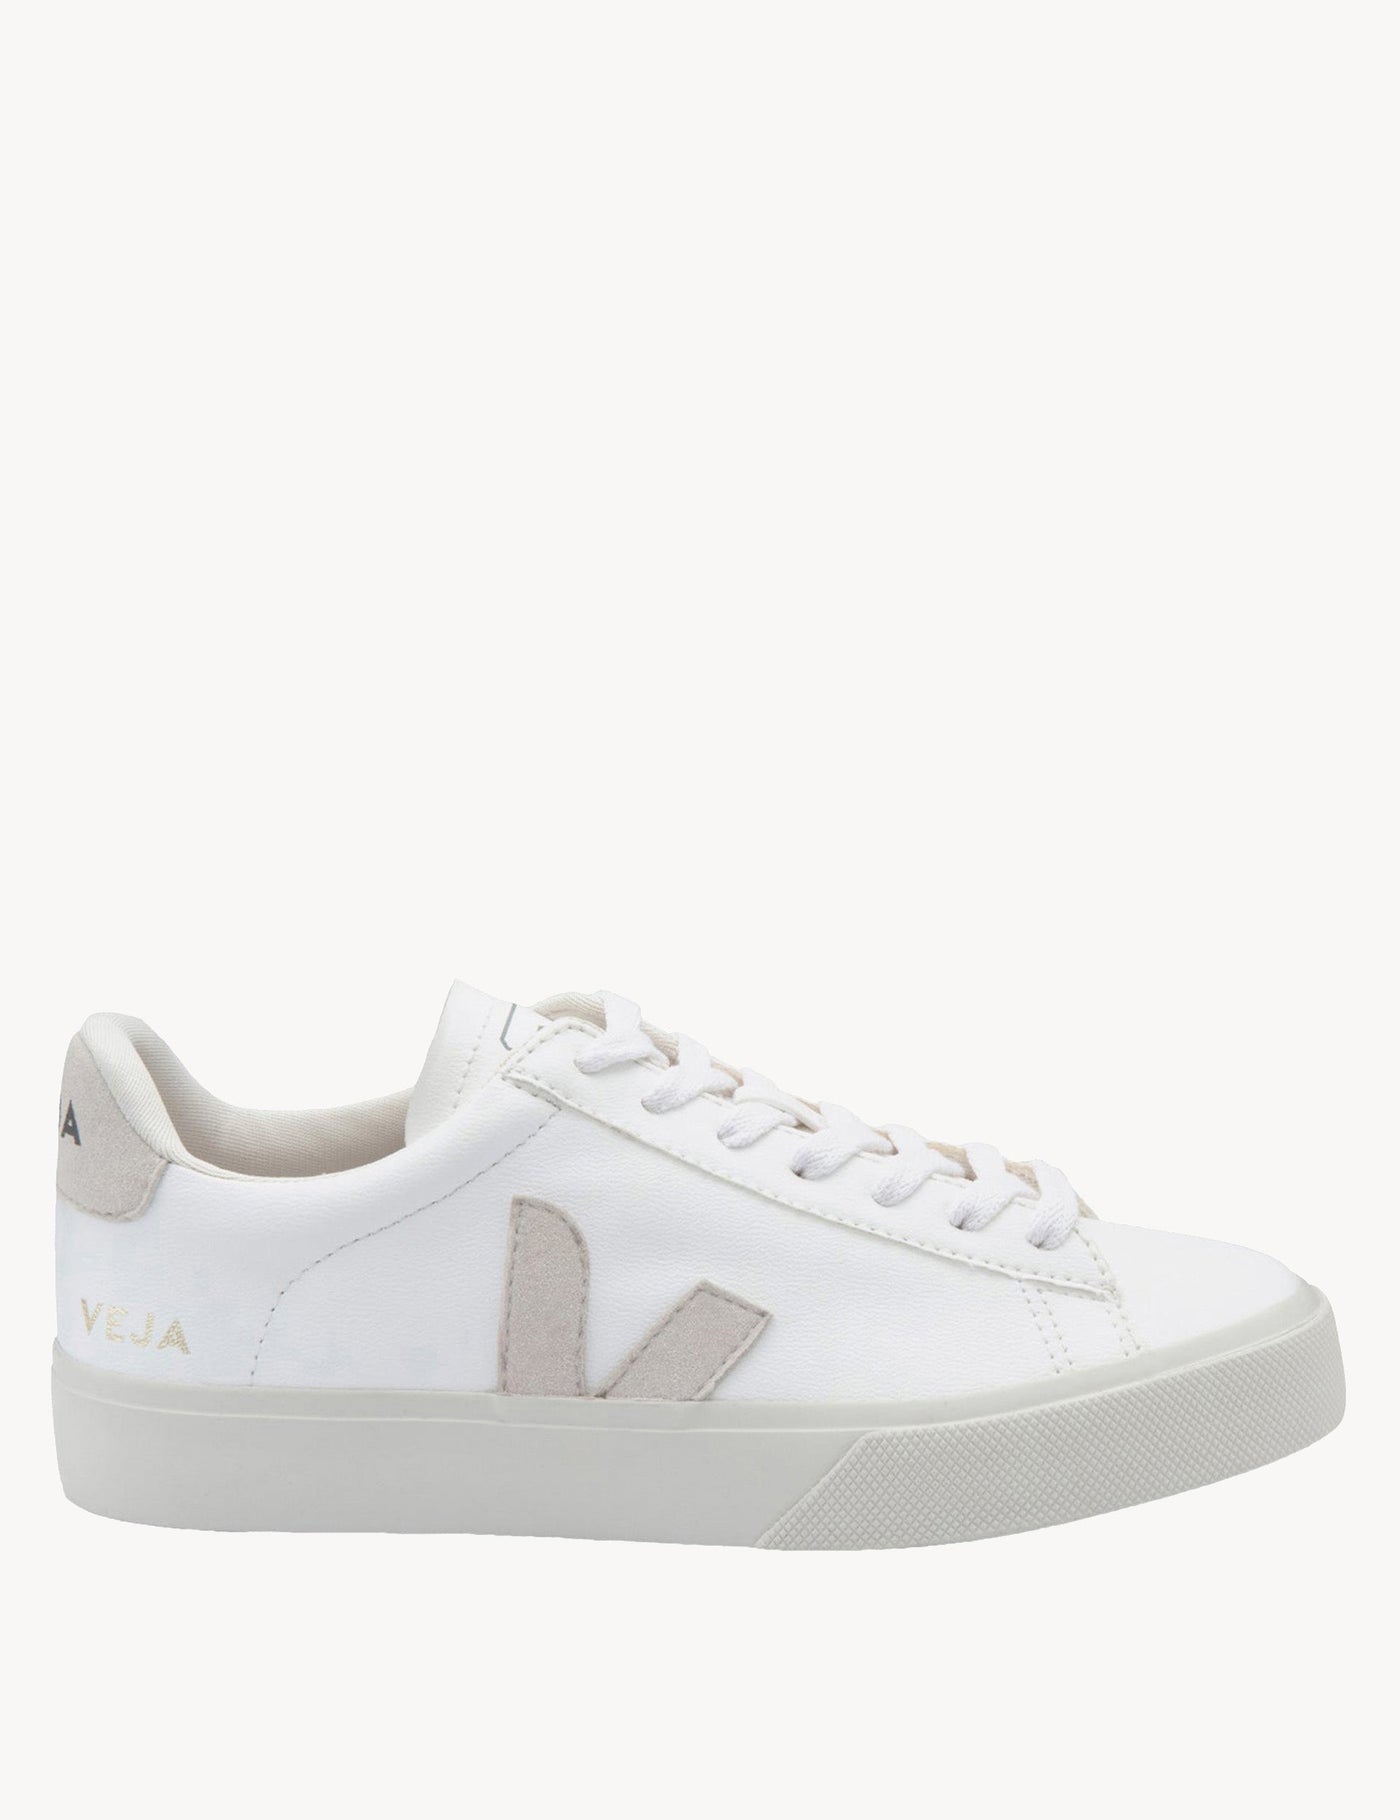 Veja | Campo Leather Trainers - White Natural | The Sports Edit